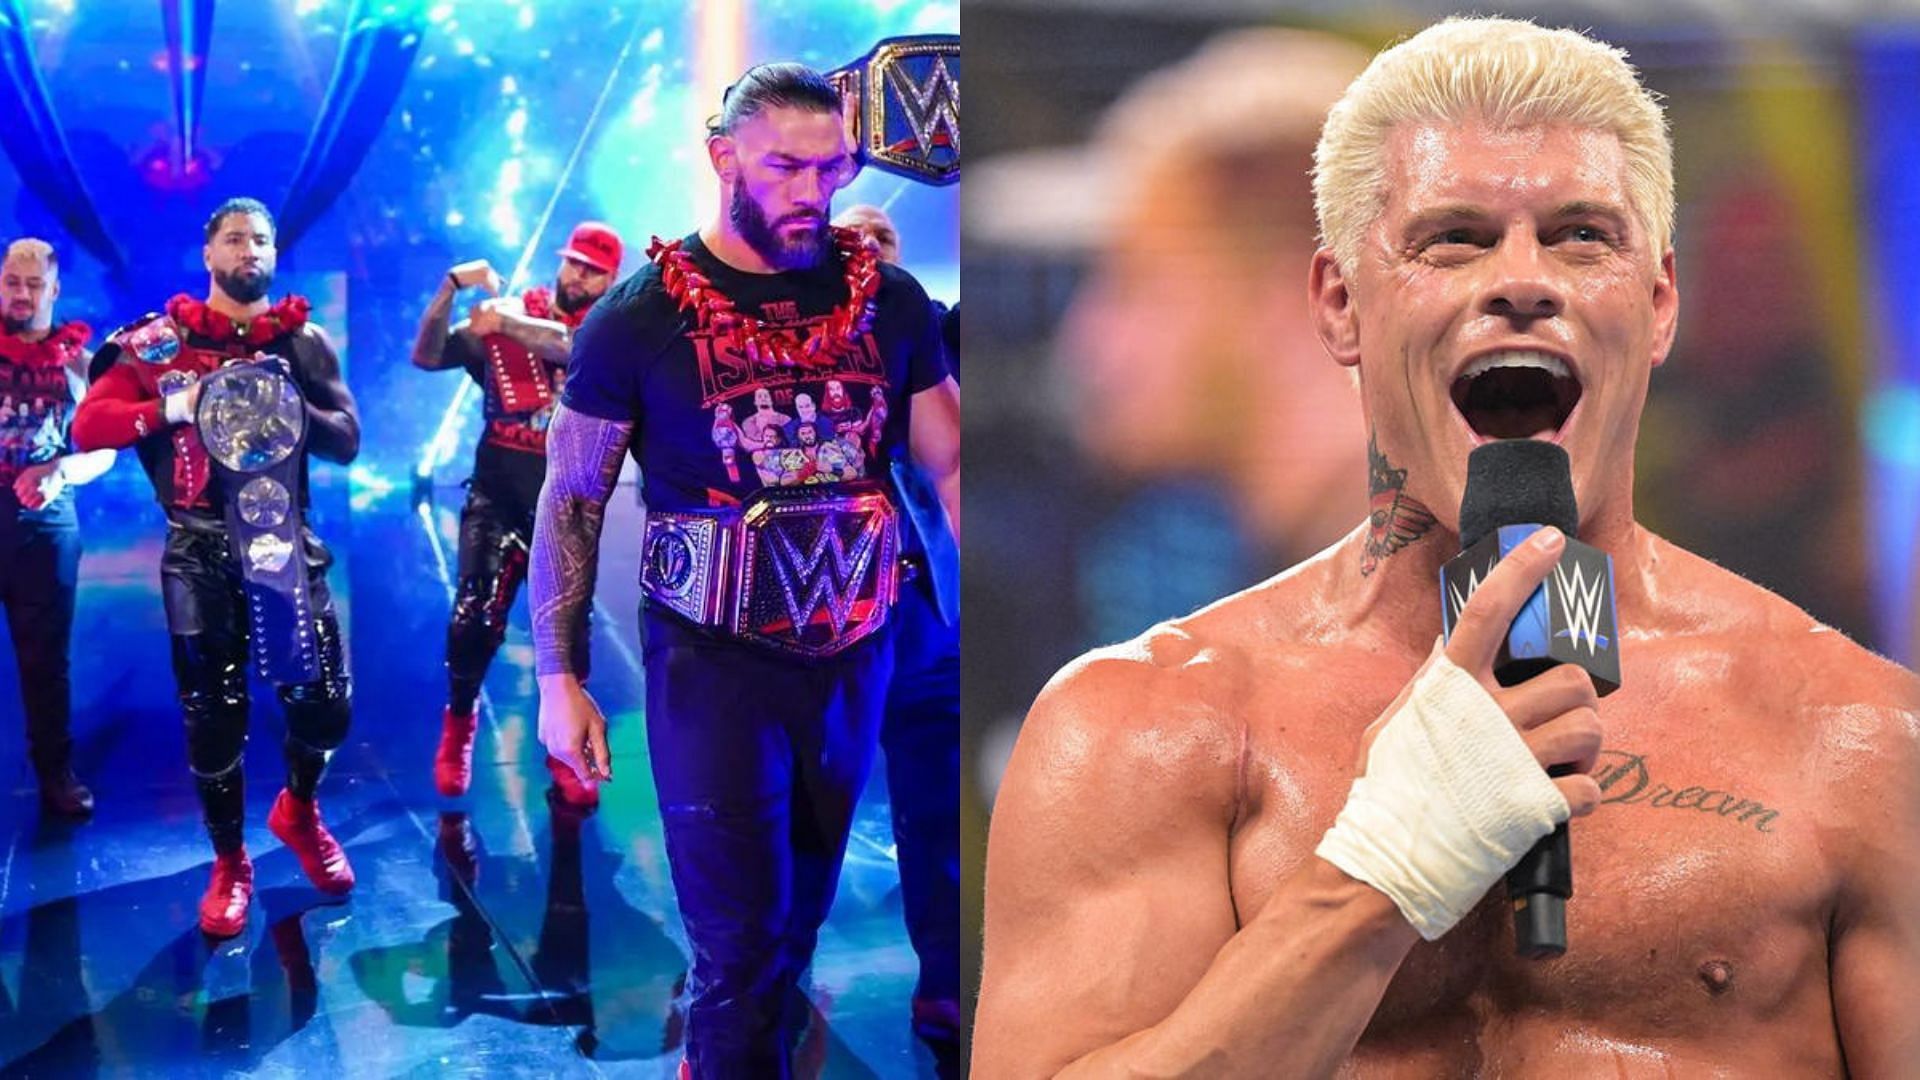 Roman Reigns and Cody Rhodes will come face-to-face on the final SmackDown before WrestleMania